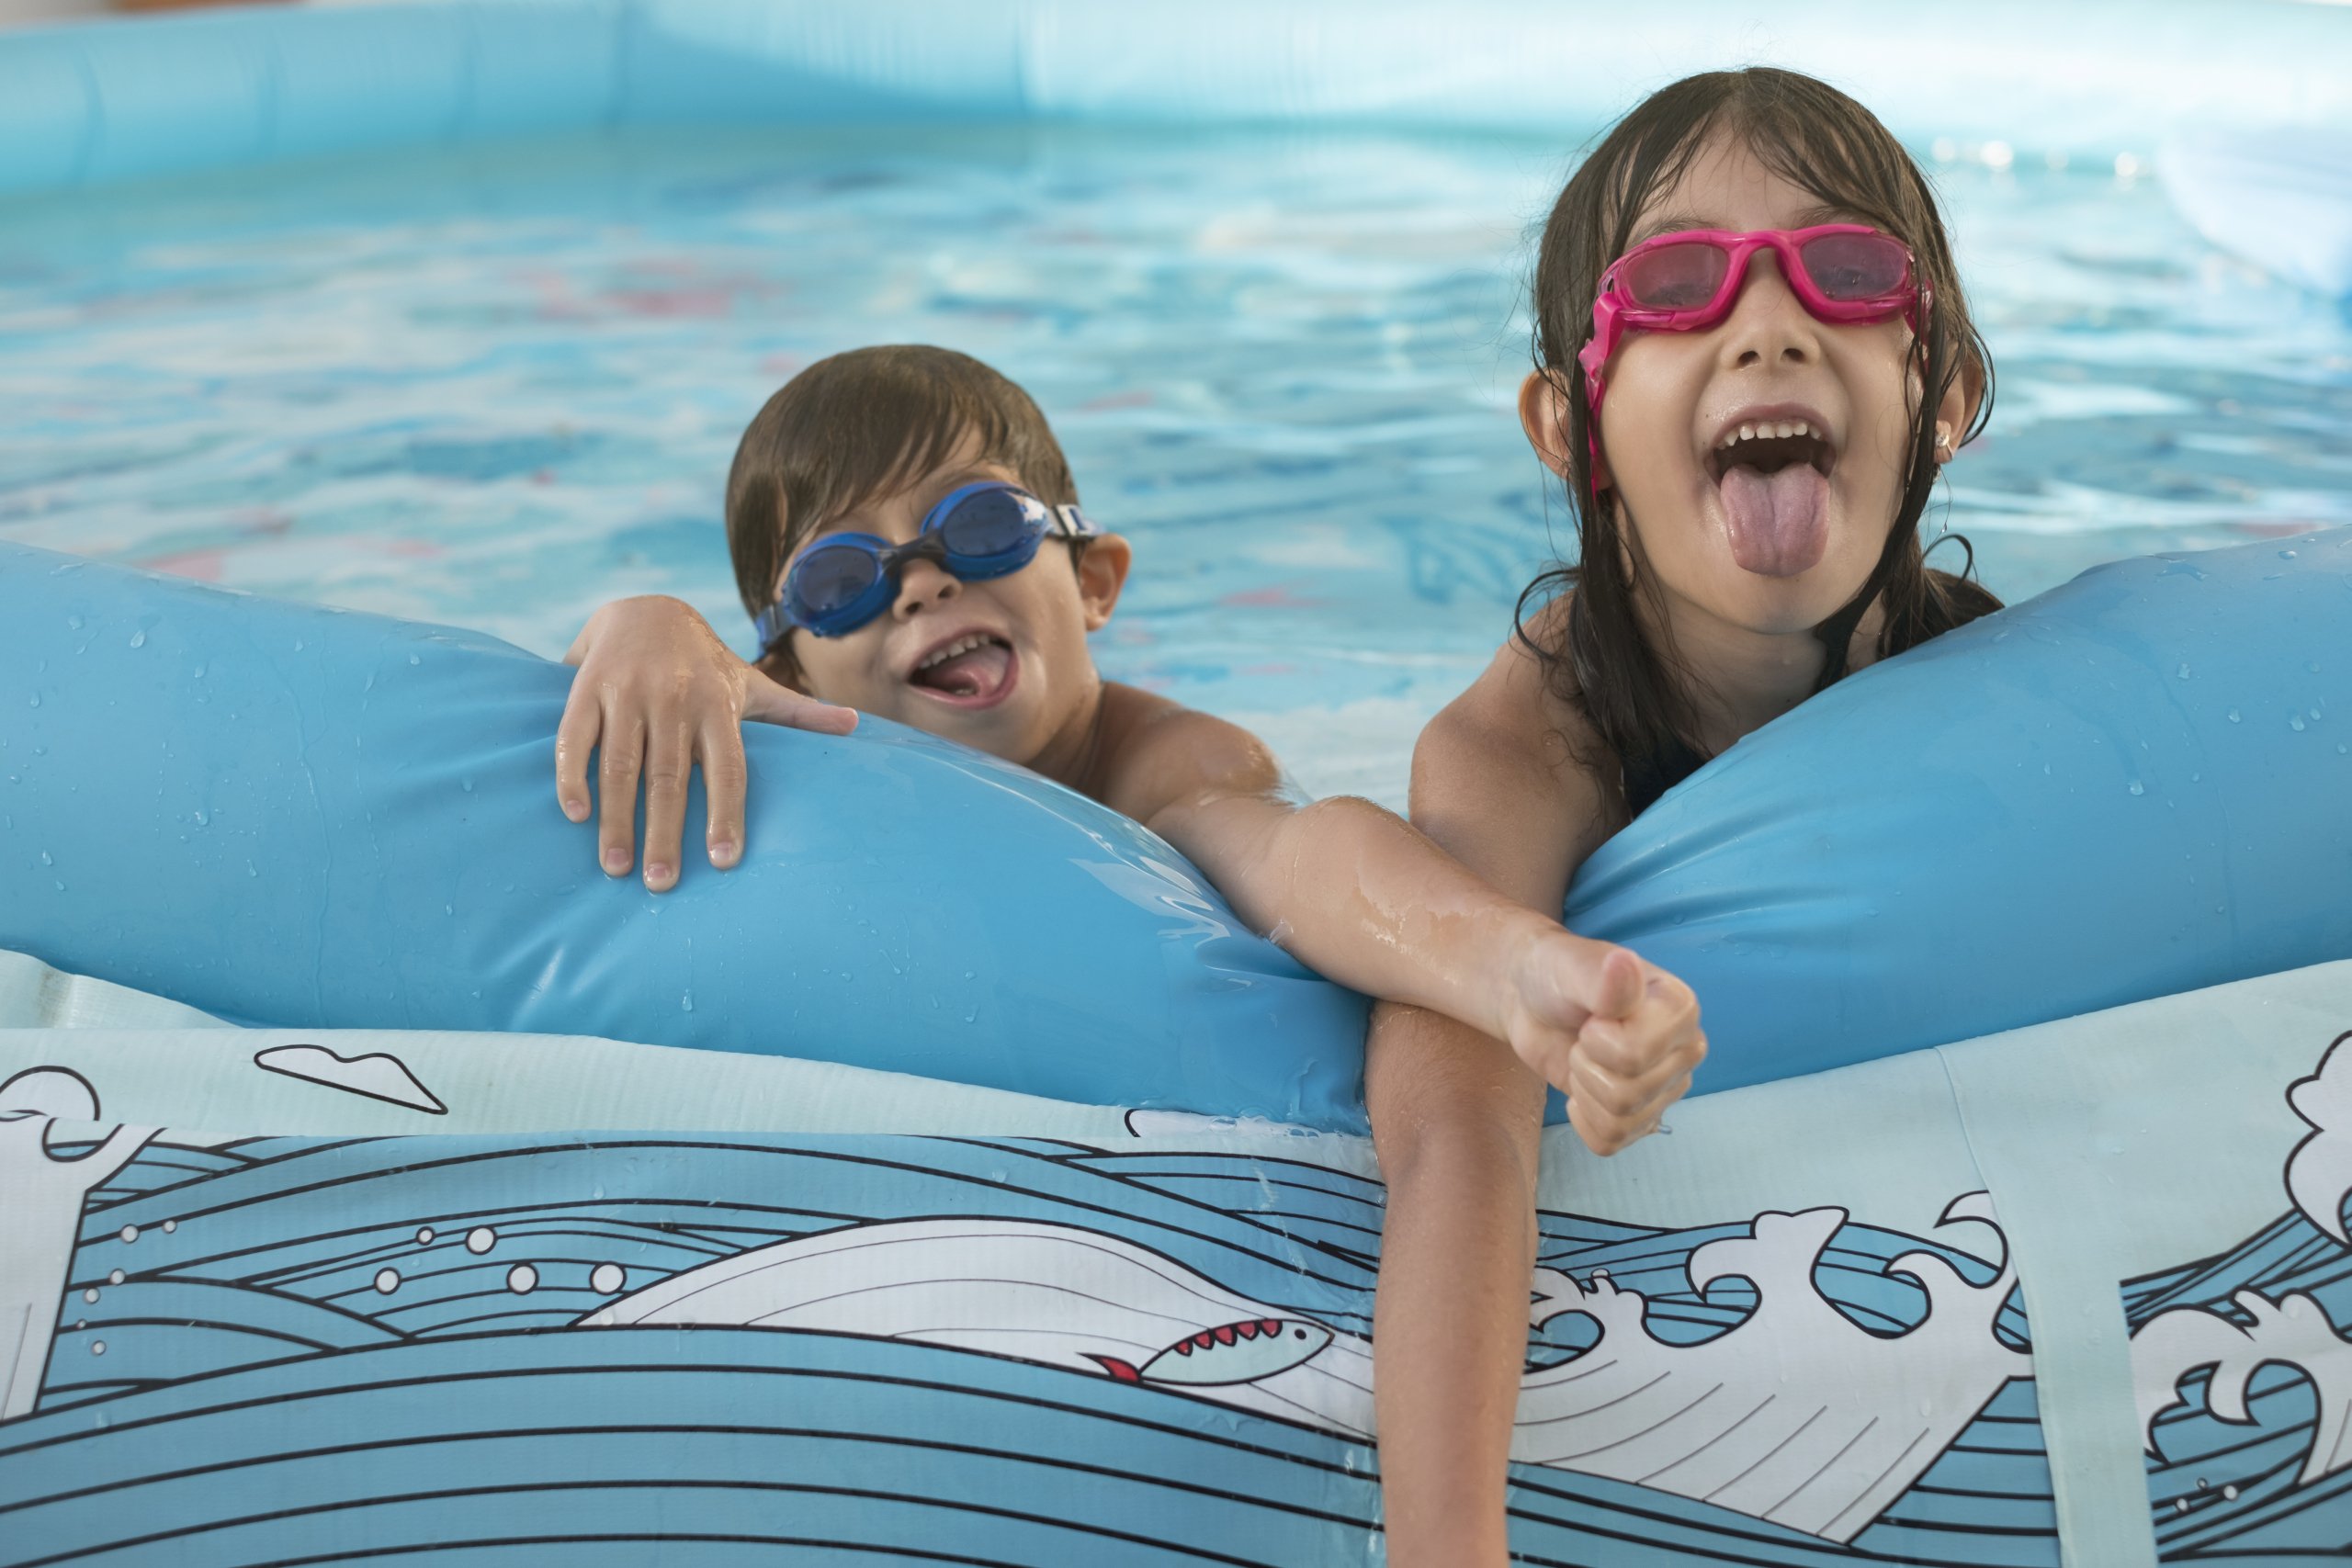 young boy and girl with goggles on playing in a swimming pool